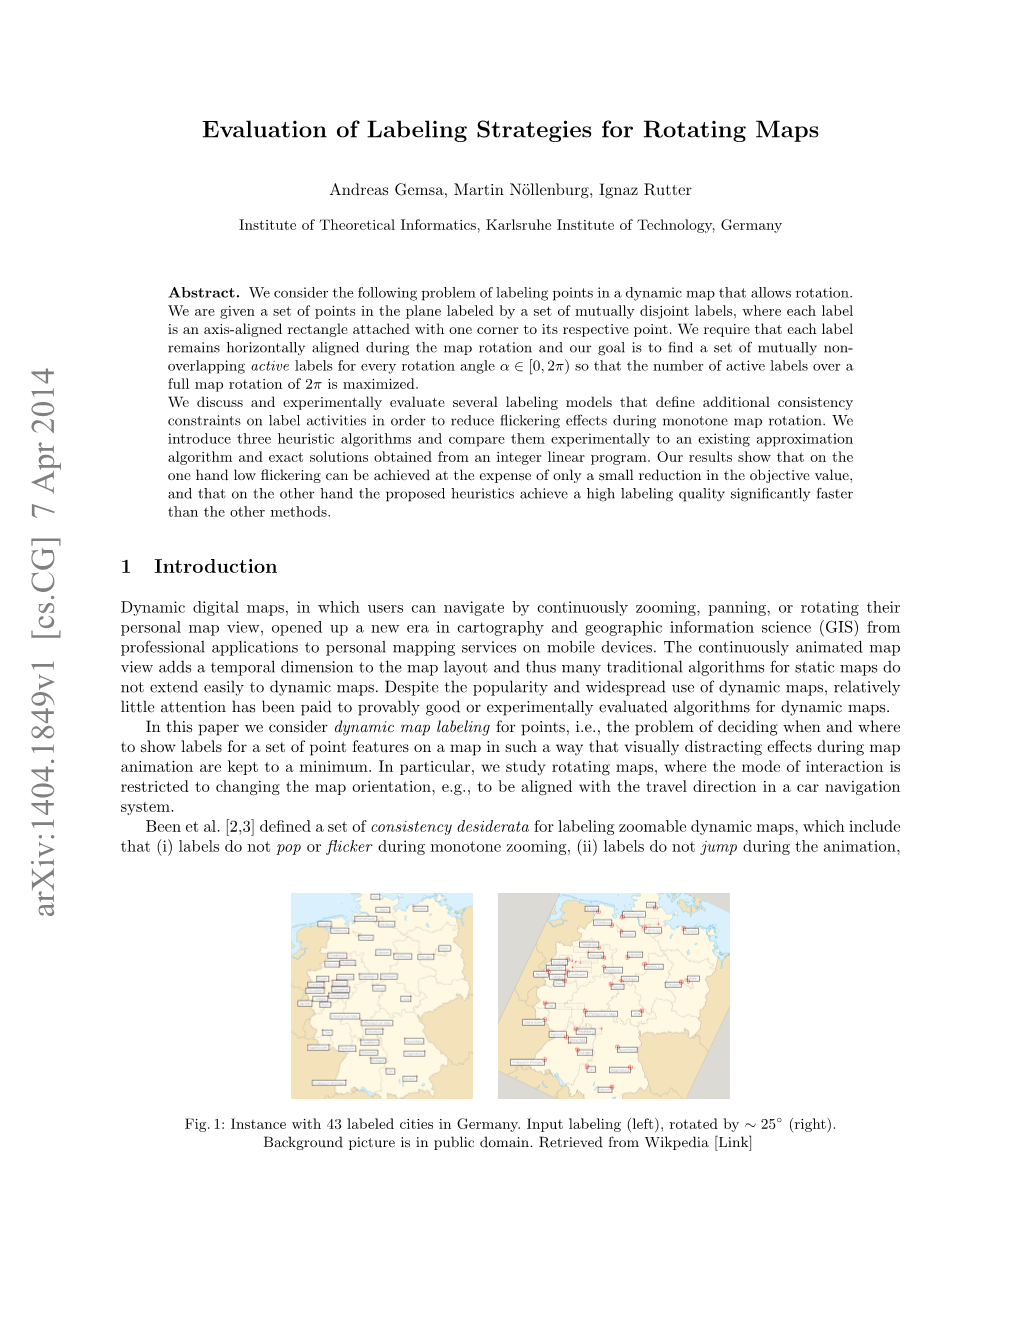 Evaluation of Labeling Strategies for Rotating Maps